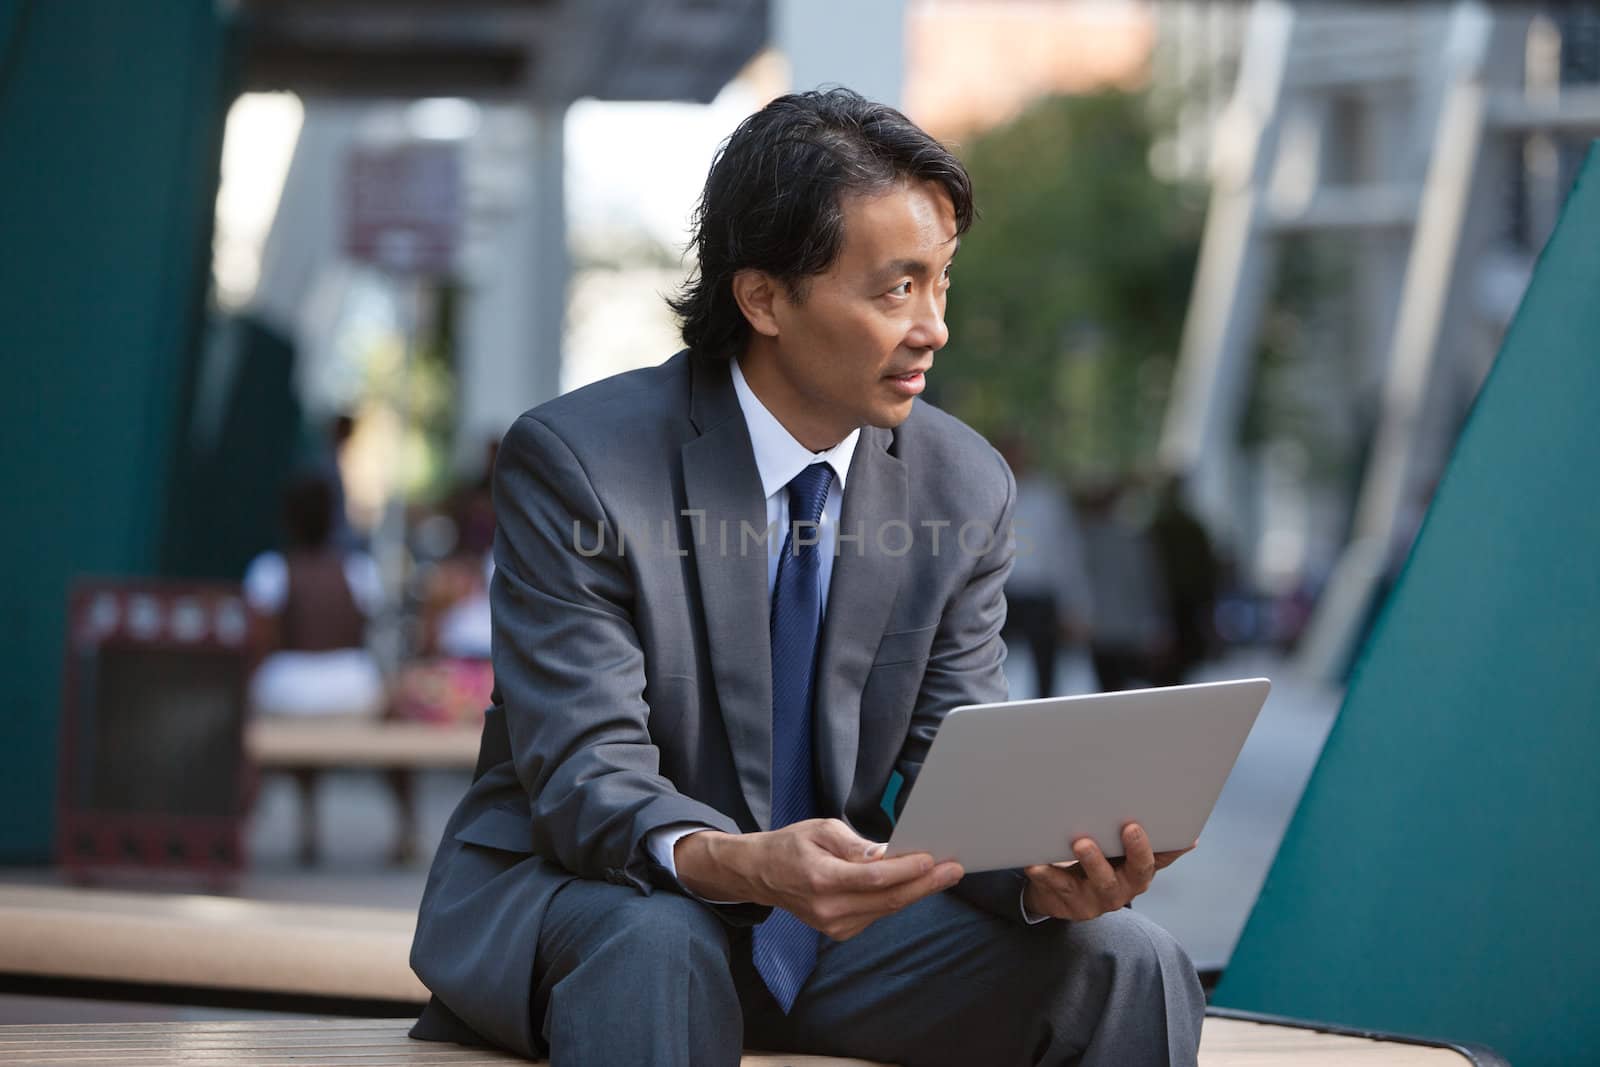 Businessman holding laptop and looking away